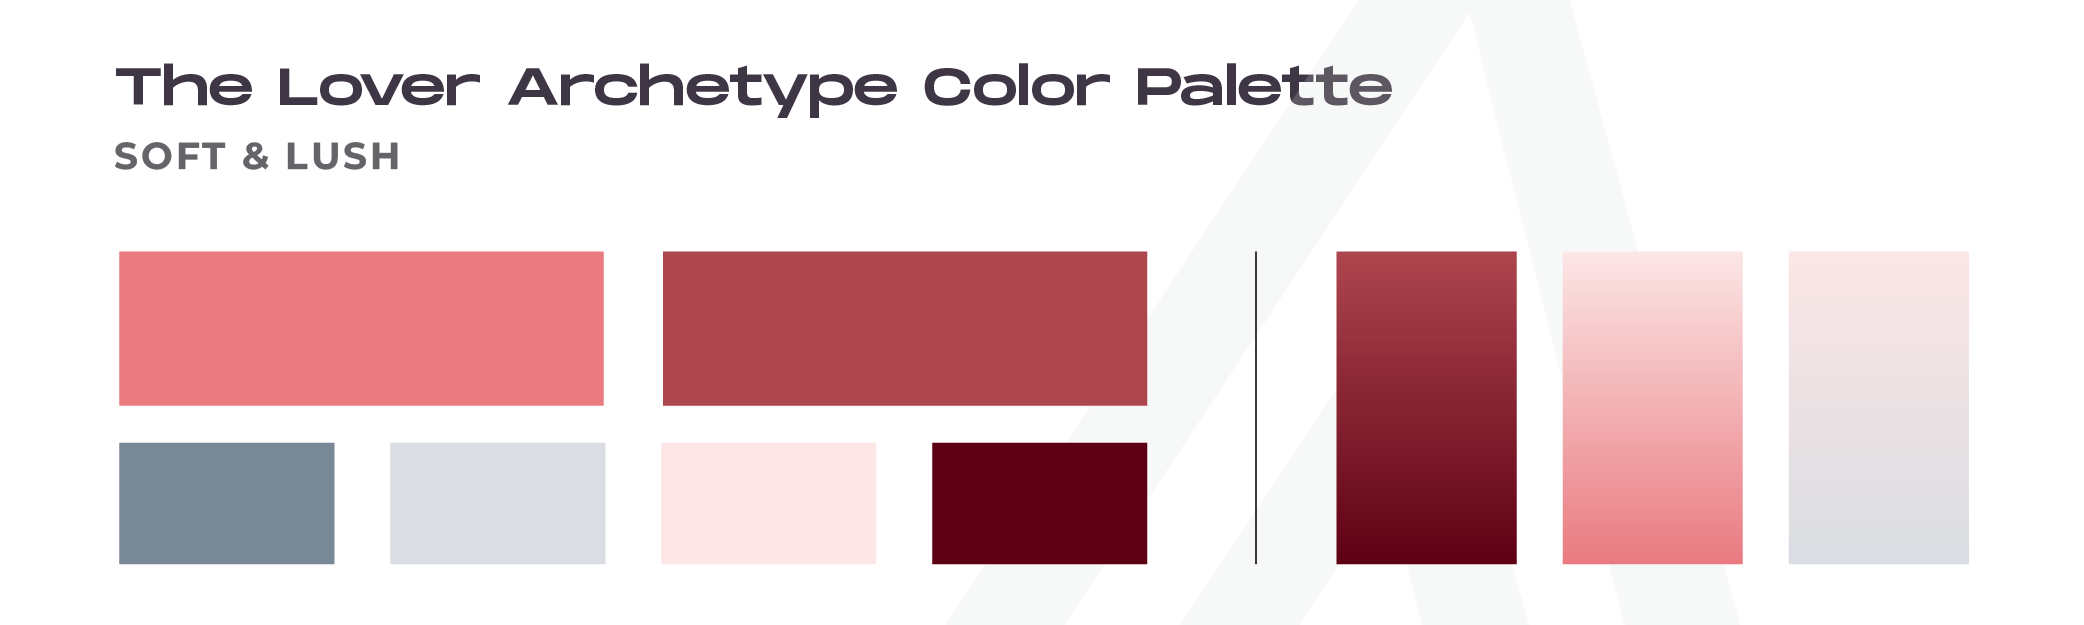 Brand Archetypes Color Palettes_The Lover